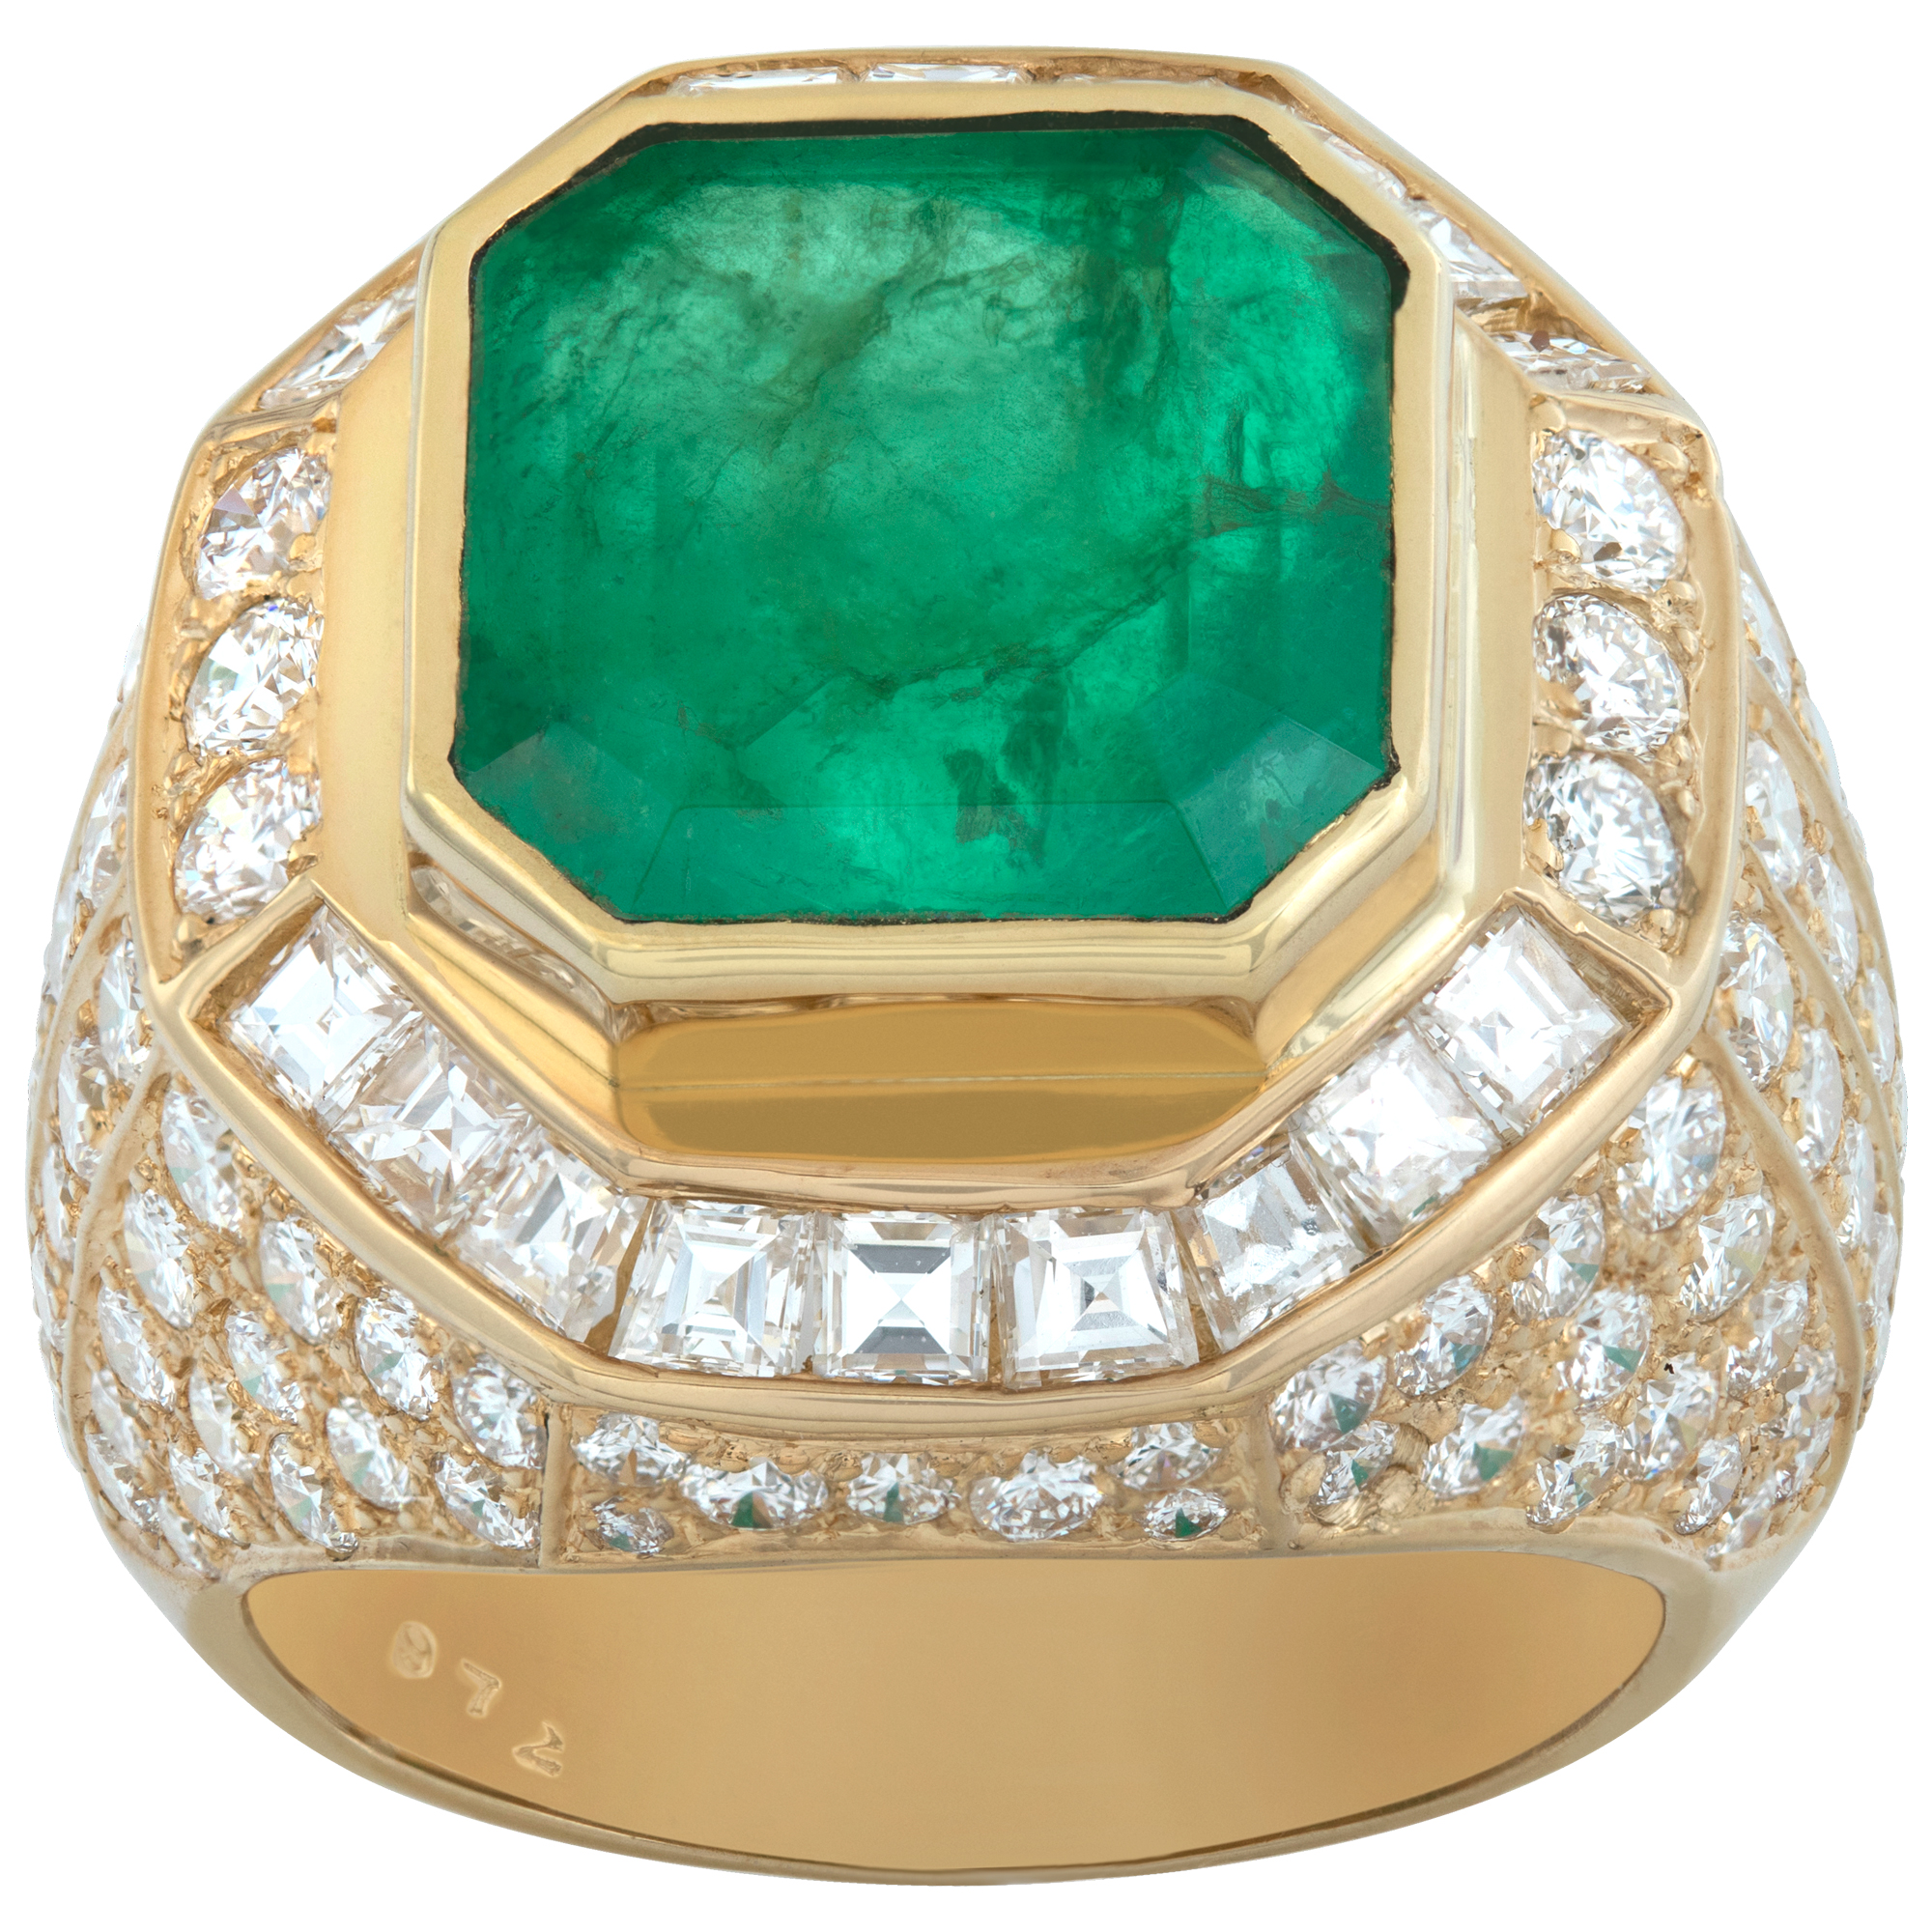 AGL certified, Colombian Emerald, 9.36 carats emerald cut shape set in 18k yellow gold diamonds mounting, with approx total weight over 7.00 carats round brilliant and emerald cut diamonds image 1